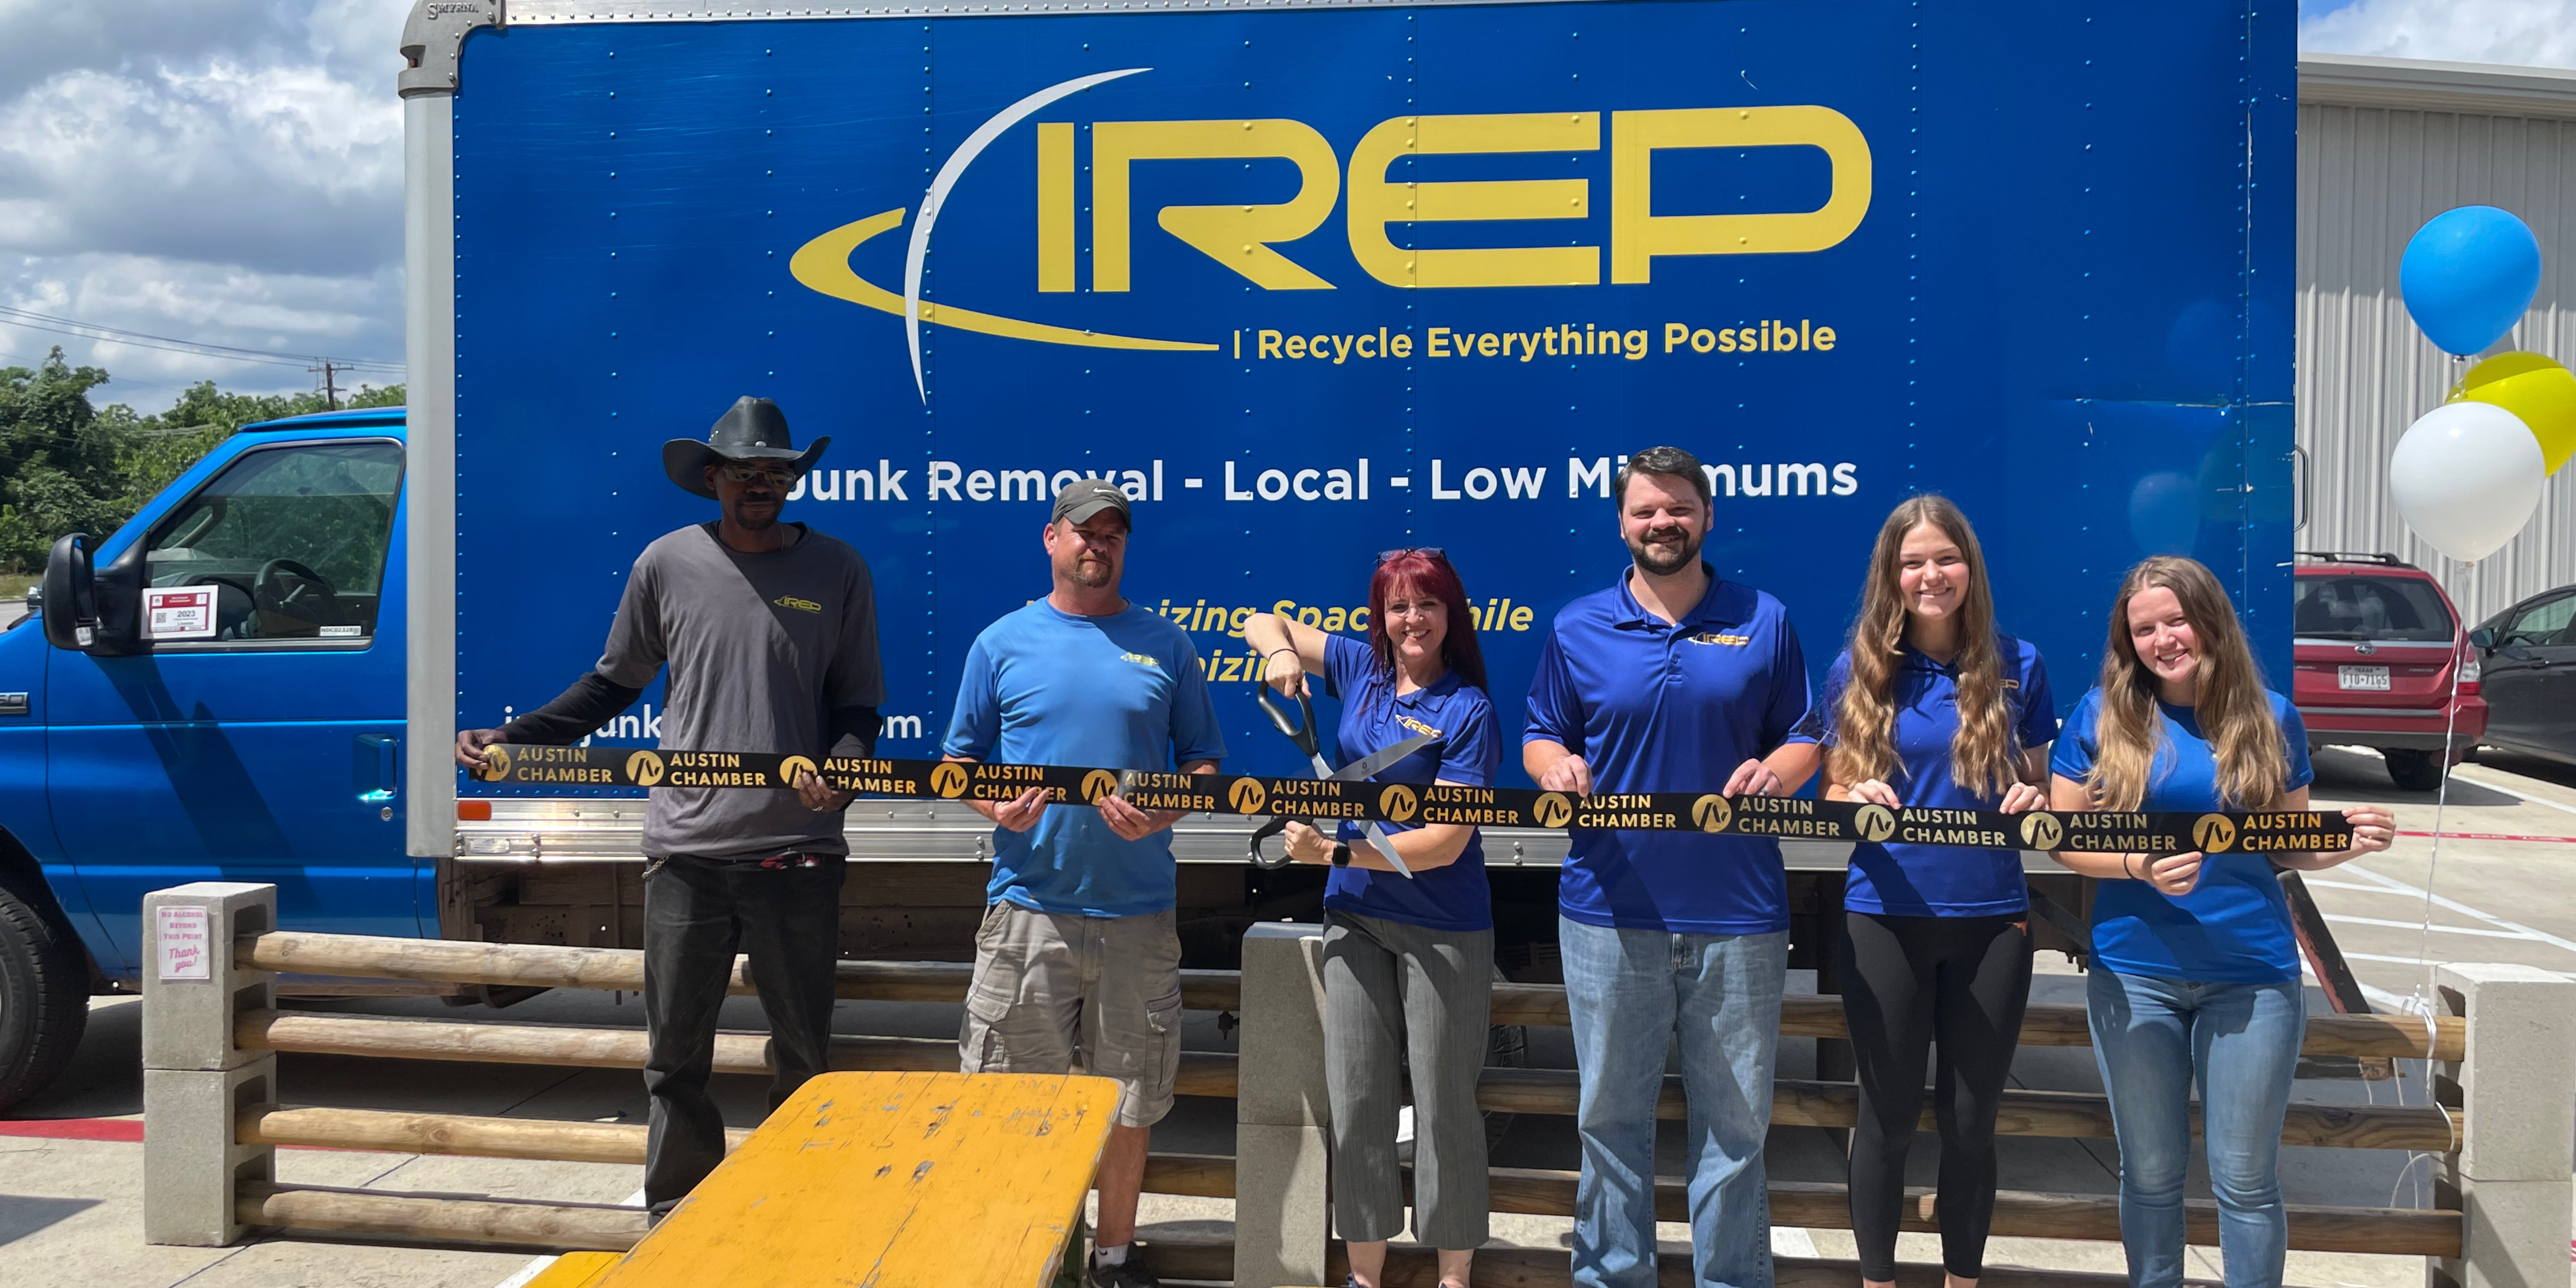 IREP Junk Removal Staff by the IREP box truck holding and cutting an Austin Chamber of Commerce ribbon